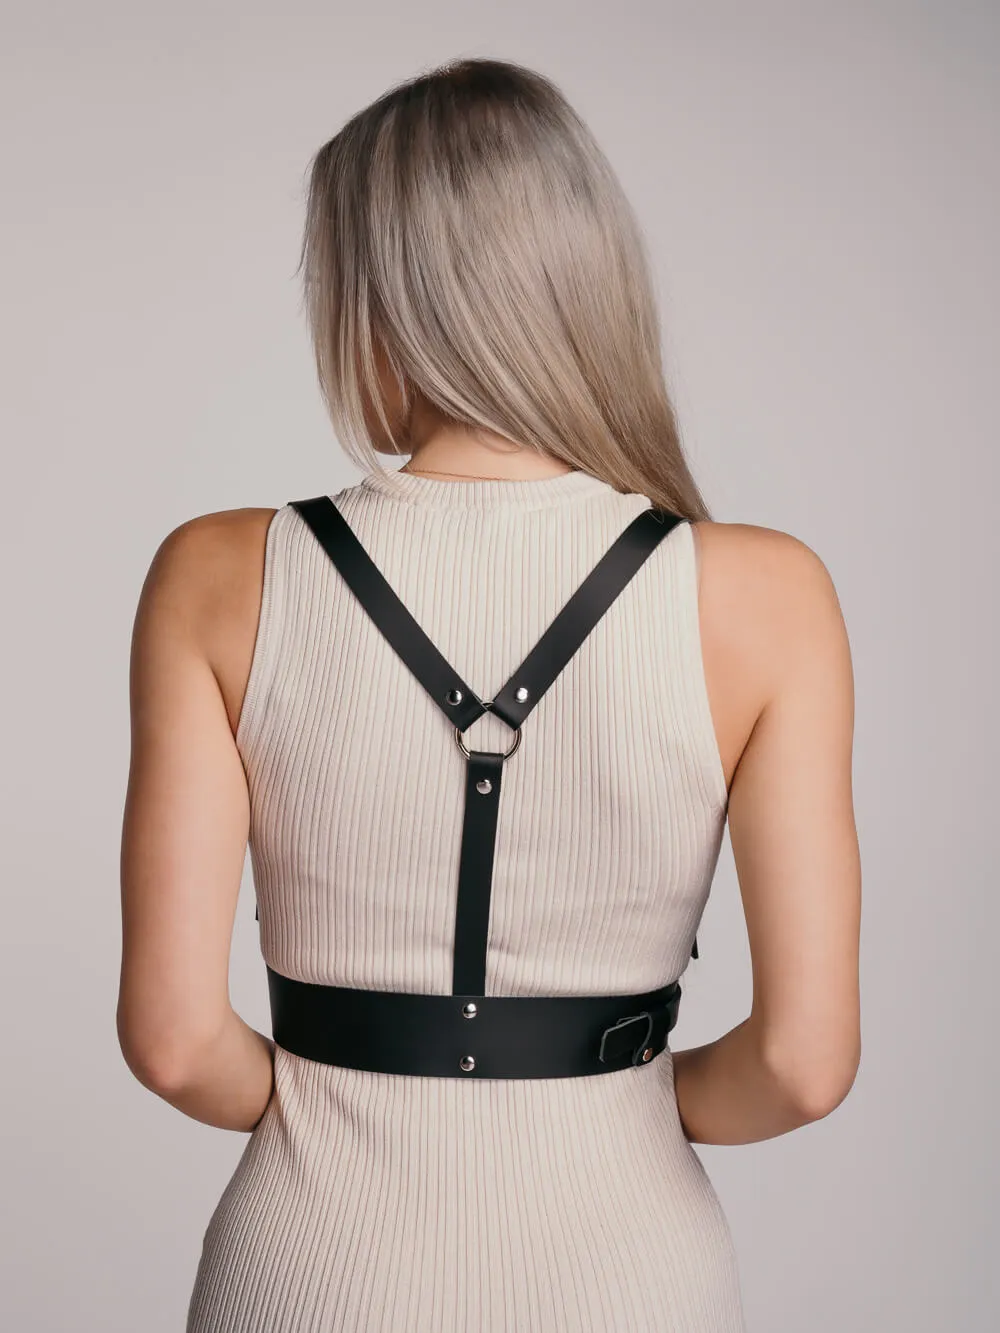 Handmade Erica harness suspenders from natural Italian leather. Massive belt with asymmetrical buckle and Y-back.